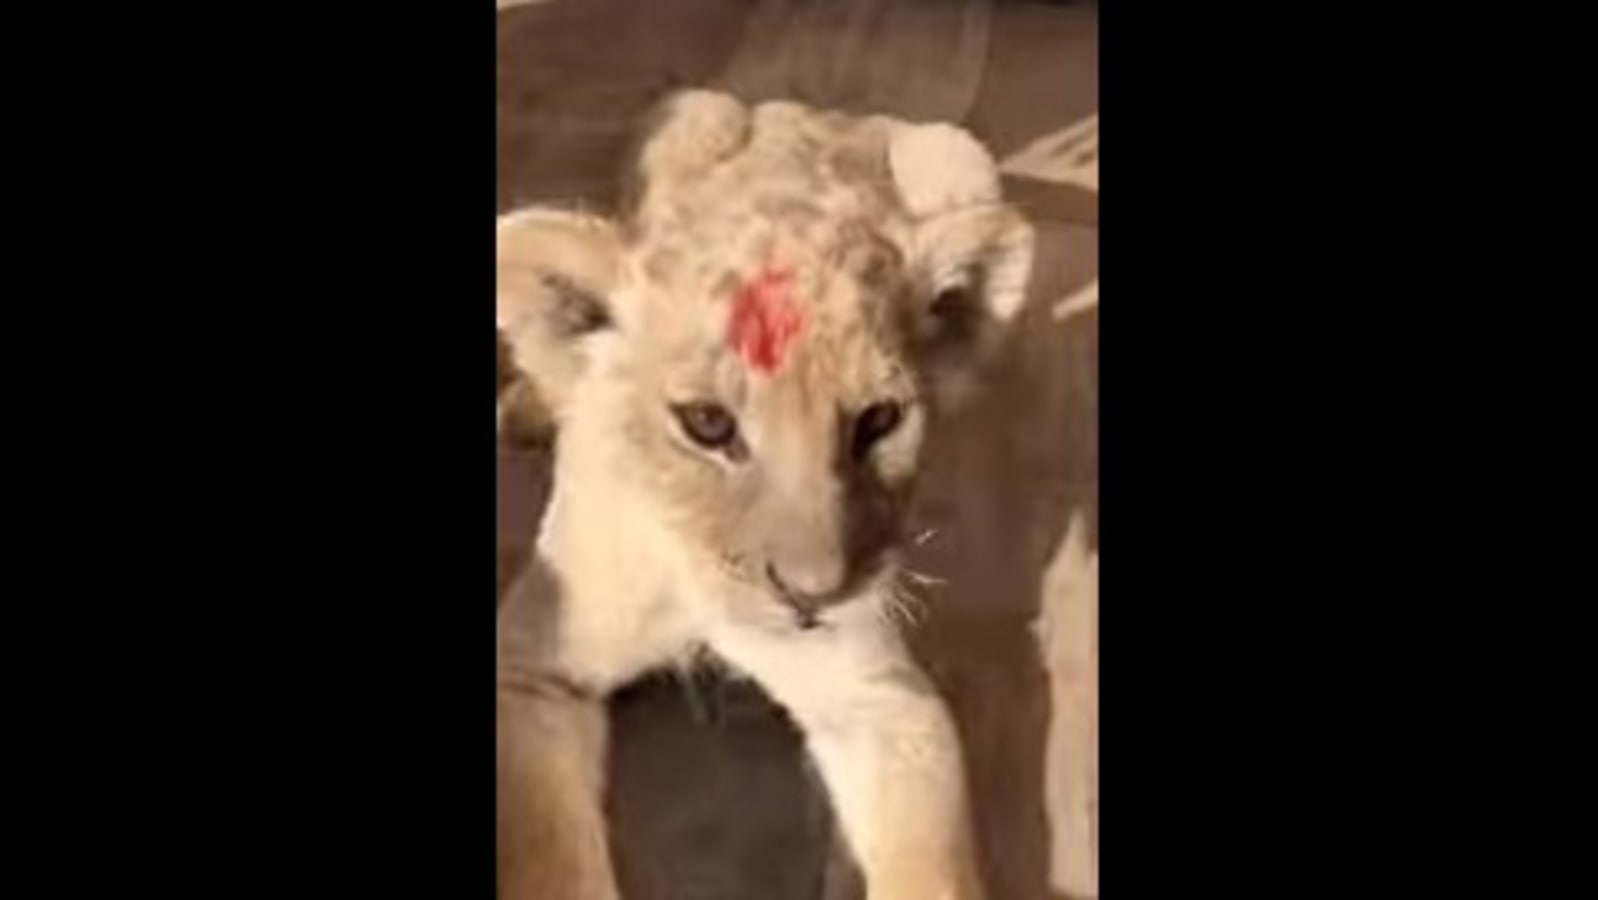 The Lion King's Simba or just a cute baby lion? Watch to find out ...